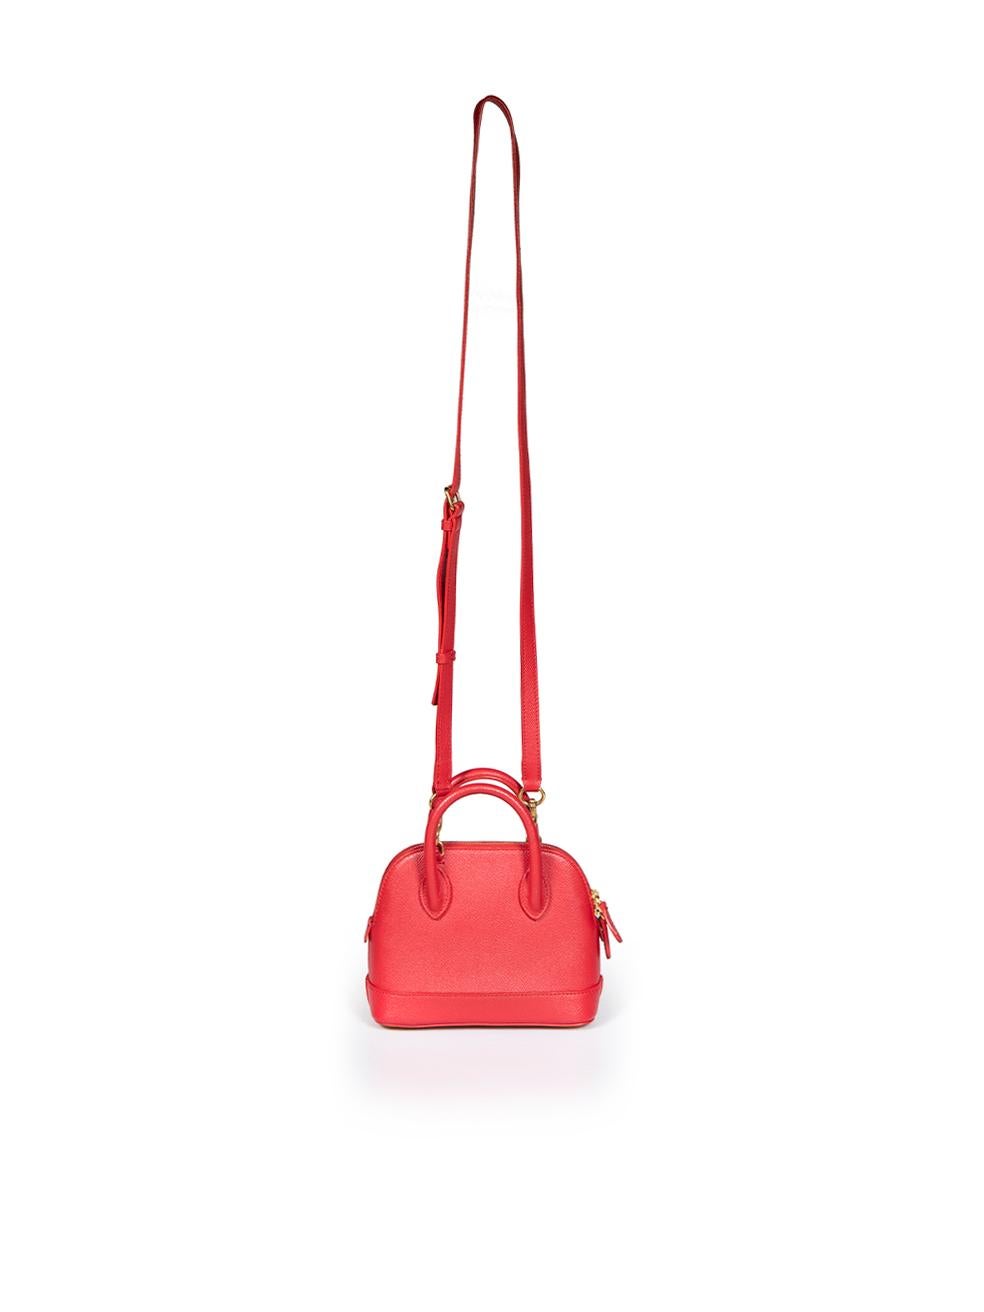 Balenciaga Red Leather XXS Ville Top Handle Bag In Good Condition For Sale In London, GB